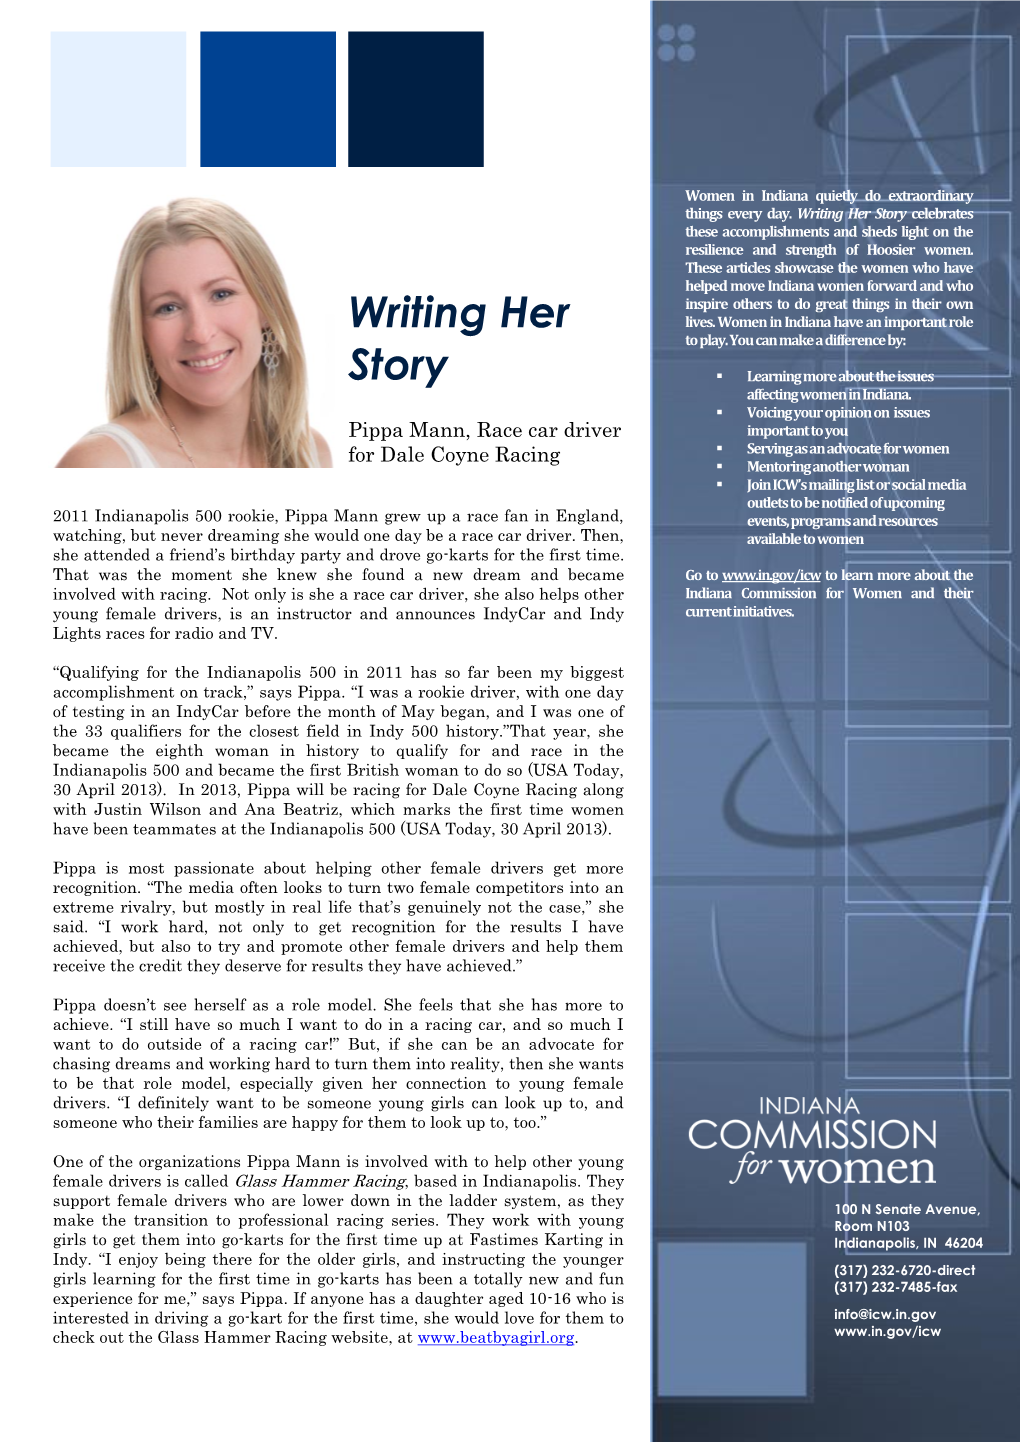 Writing Her Story Celebrates These Accomplishments and Sheds Light on the Resilience and Strength of Hoosier Women